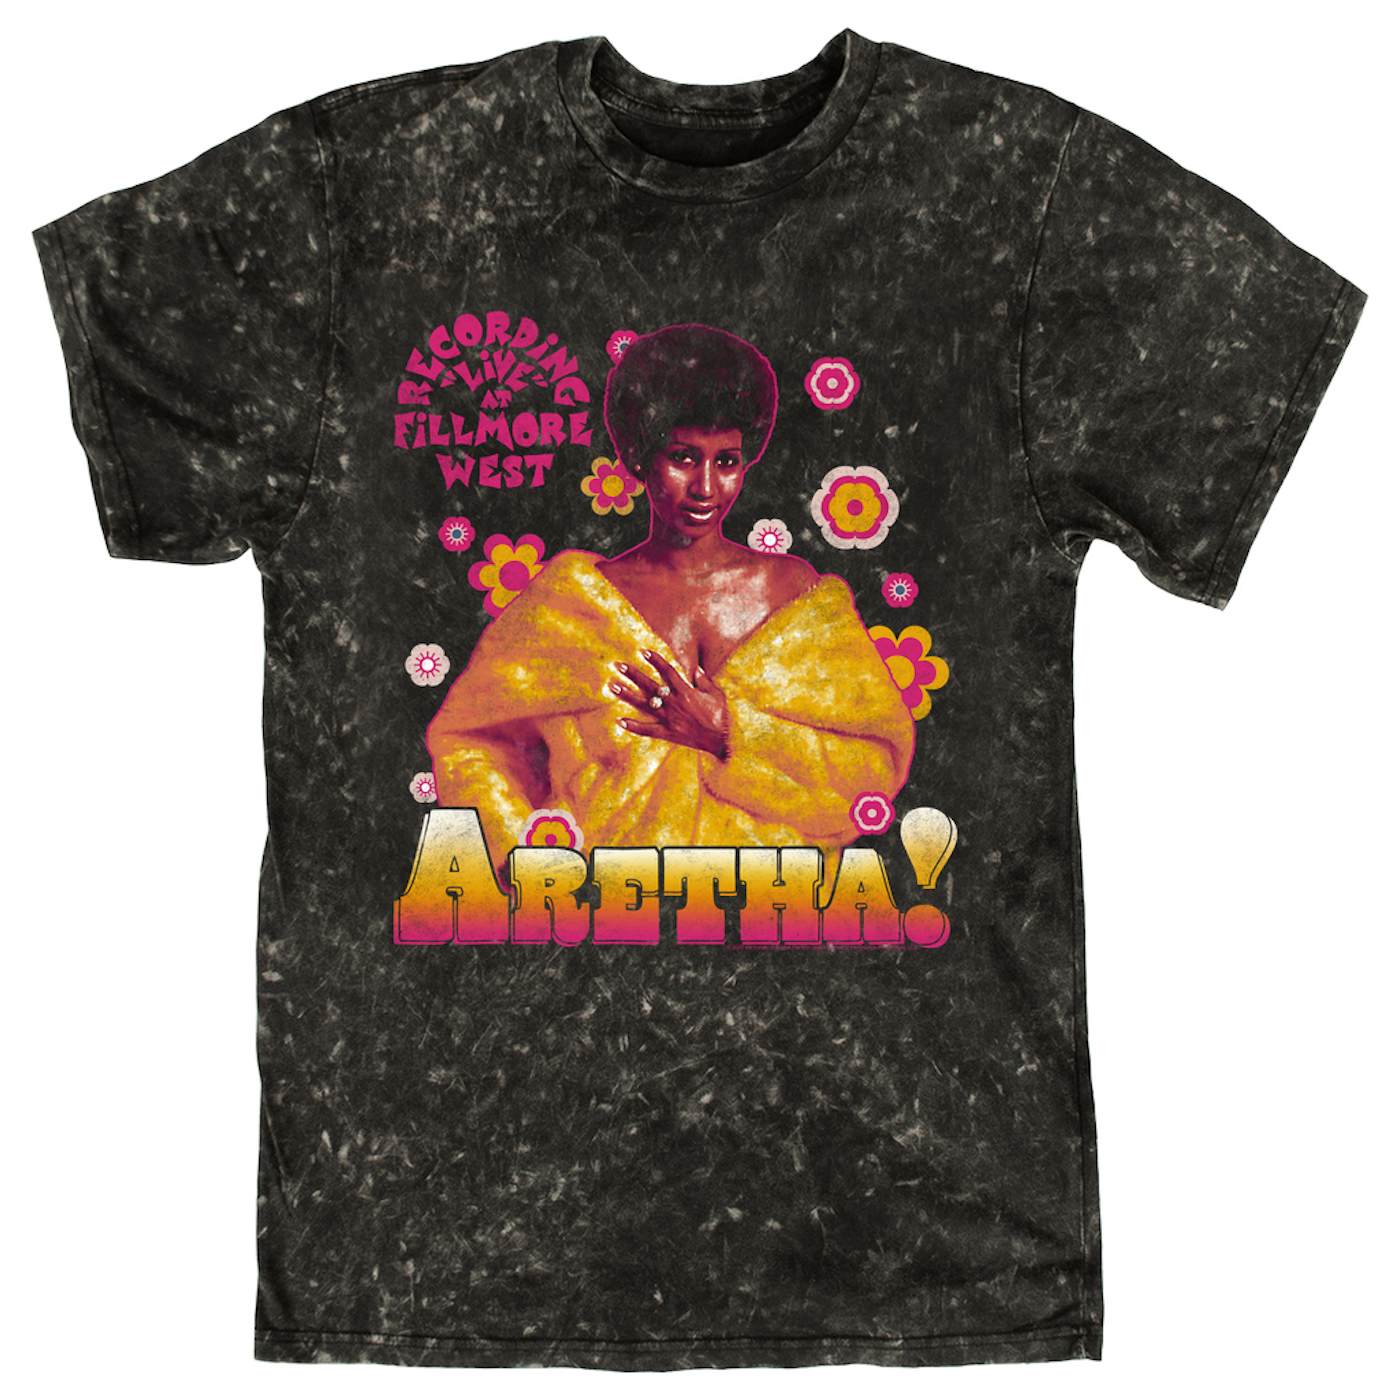 Aretha Franklin T-shirt | Flower Power From Filmore West Live Recording Aretha Franklin Mineral Wash Shirt